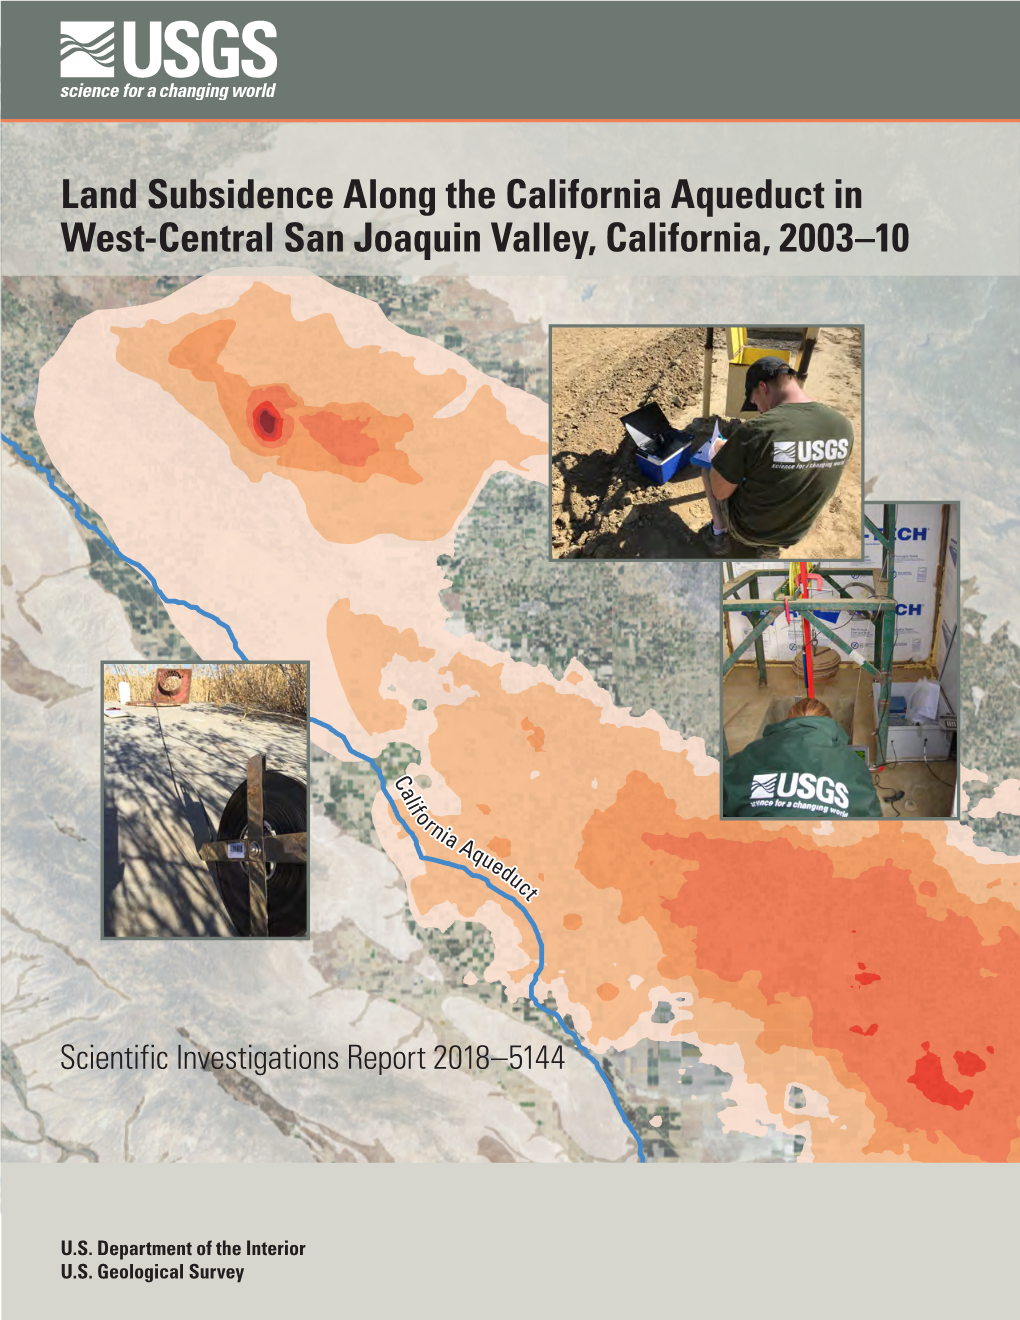 SIR 2018–5144: Land Subsidence Along the California Aqueduct In